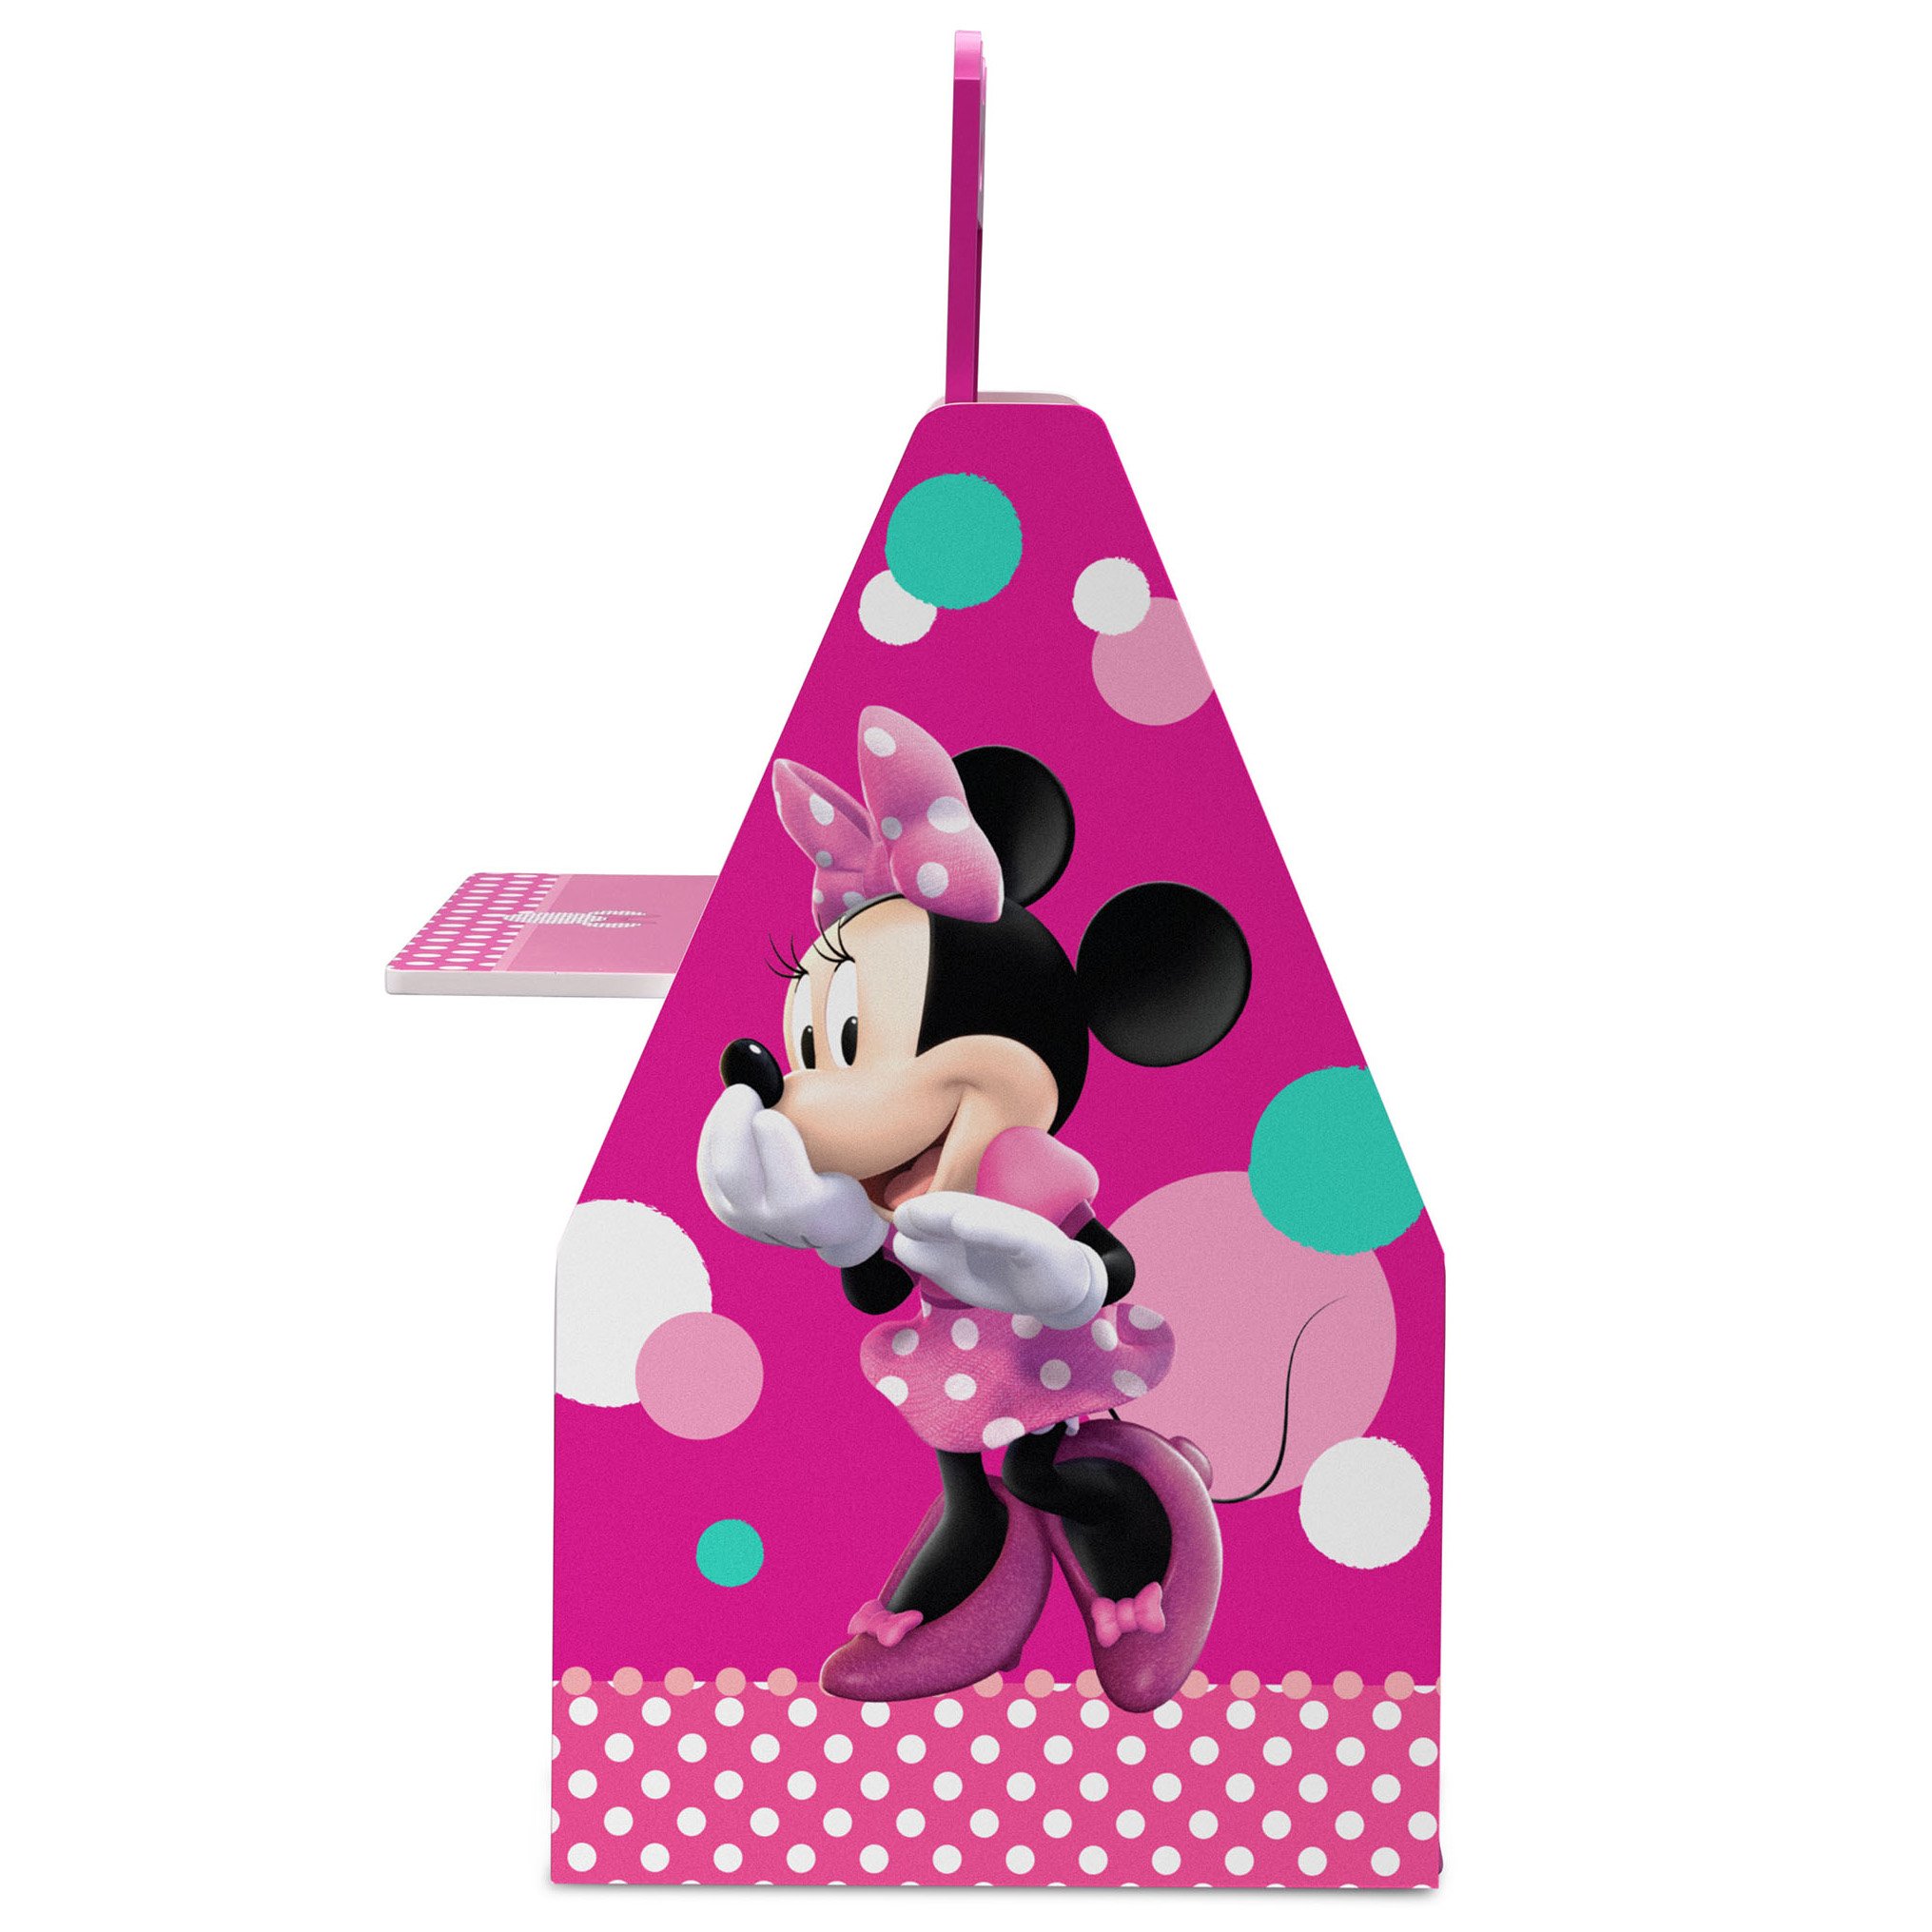 Delta Children Kids Easel and Play Station – Ideal for Arts & Crafts, Drawing, Homeschooling and More - Greenguard Gold Certified, Disney Minnie Mouse